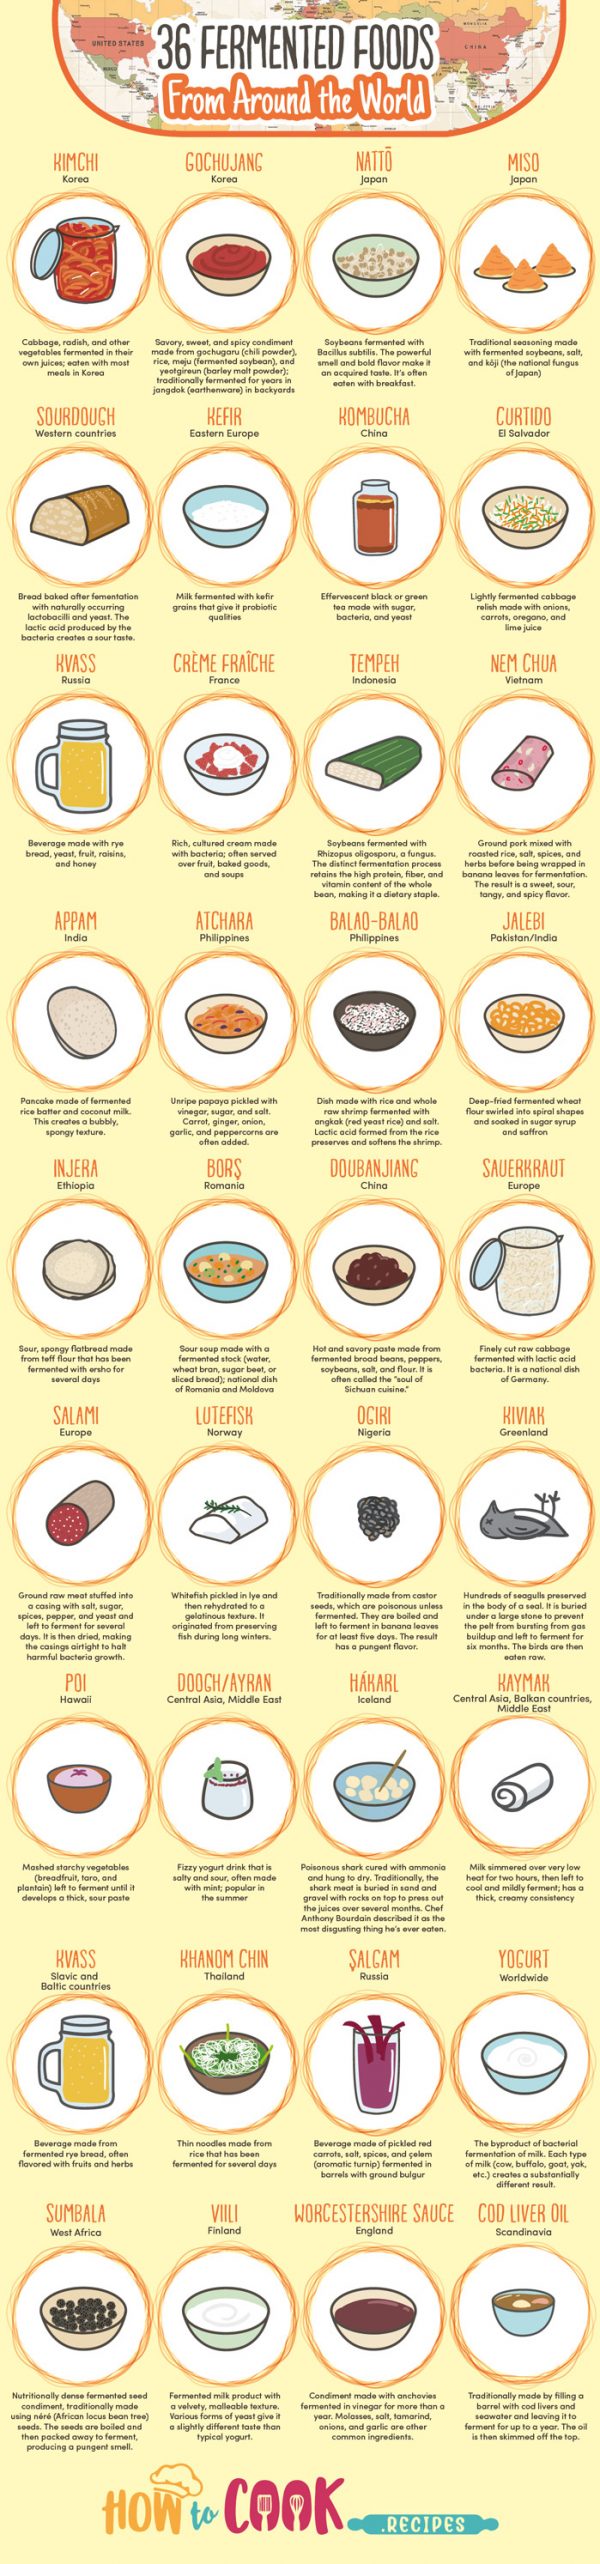 36 Fermented Foods from Around the World - Best Infographics